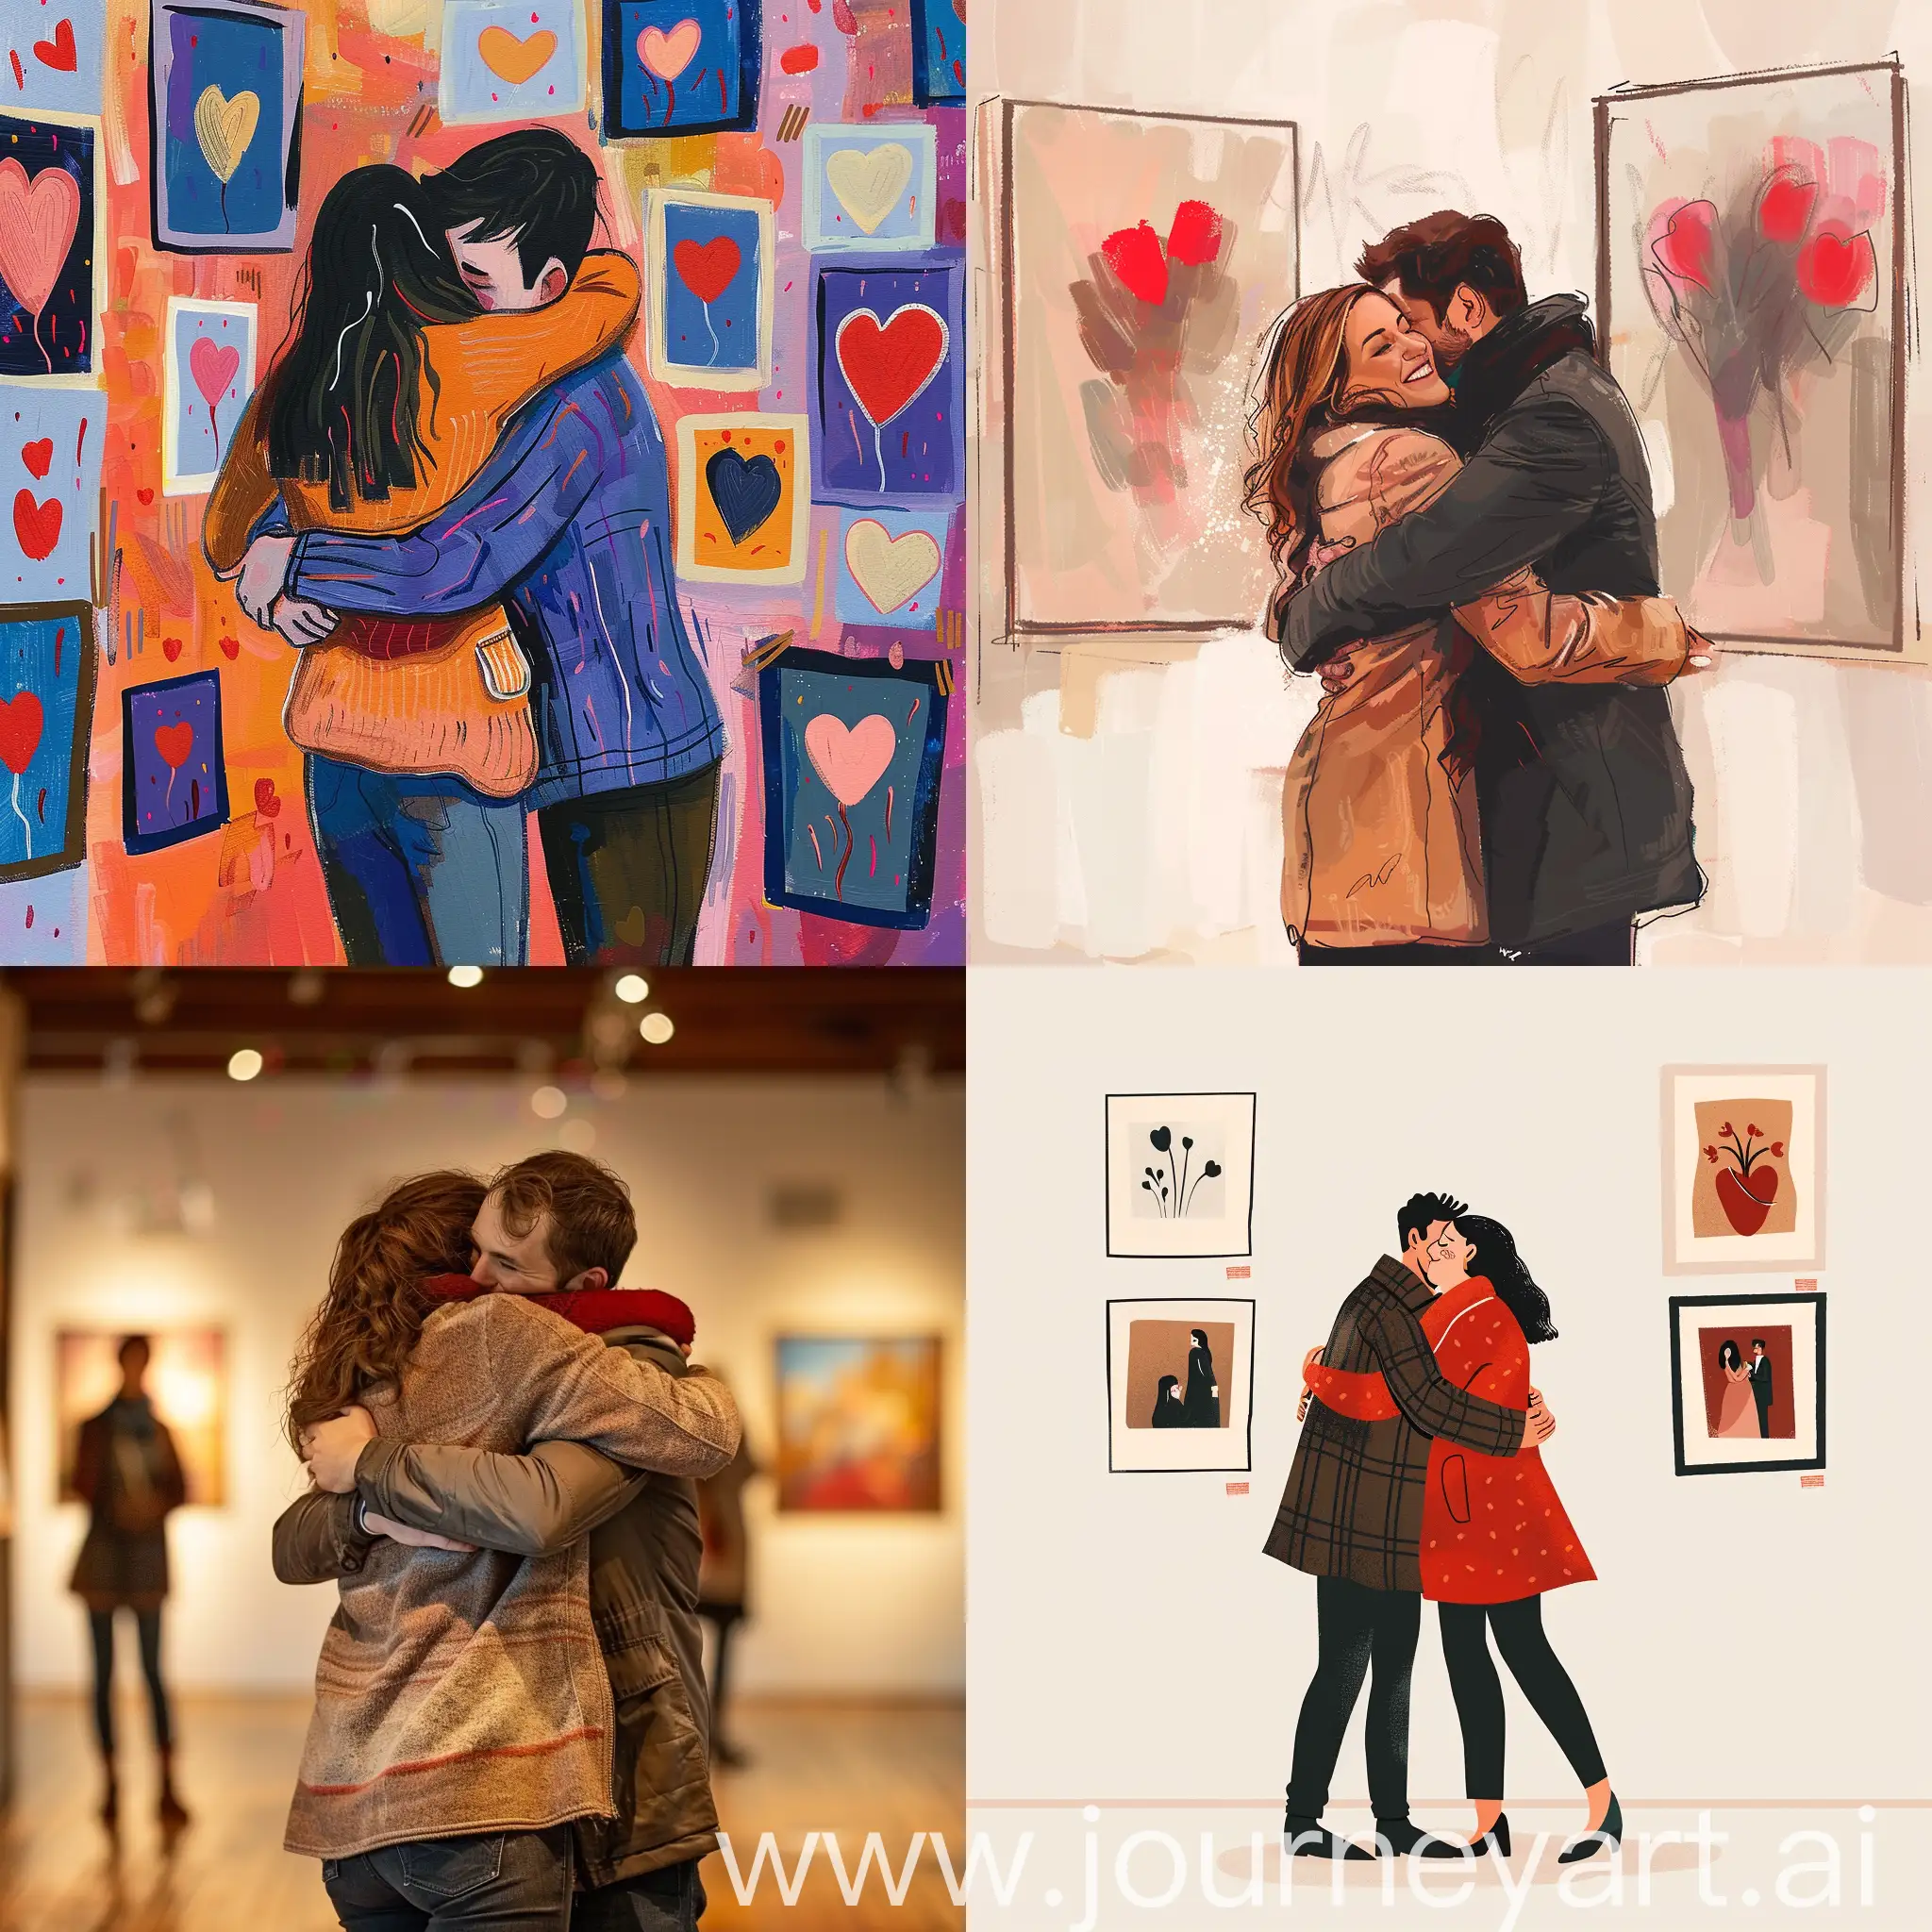 Romantic-Valentines-Day-Gallery-Date-with-Loving-Embrace